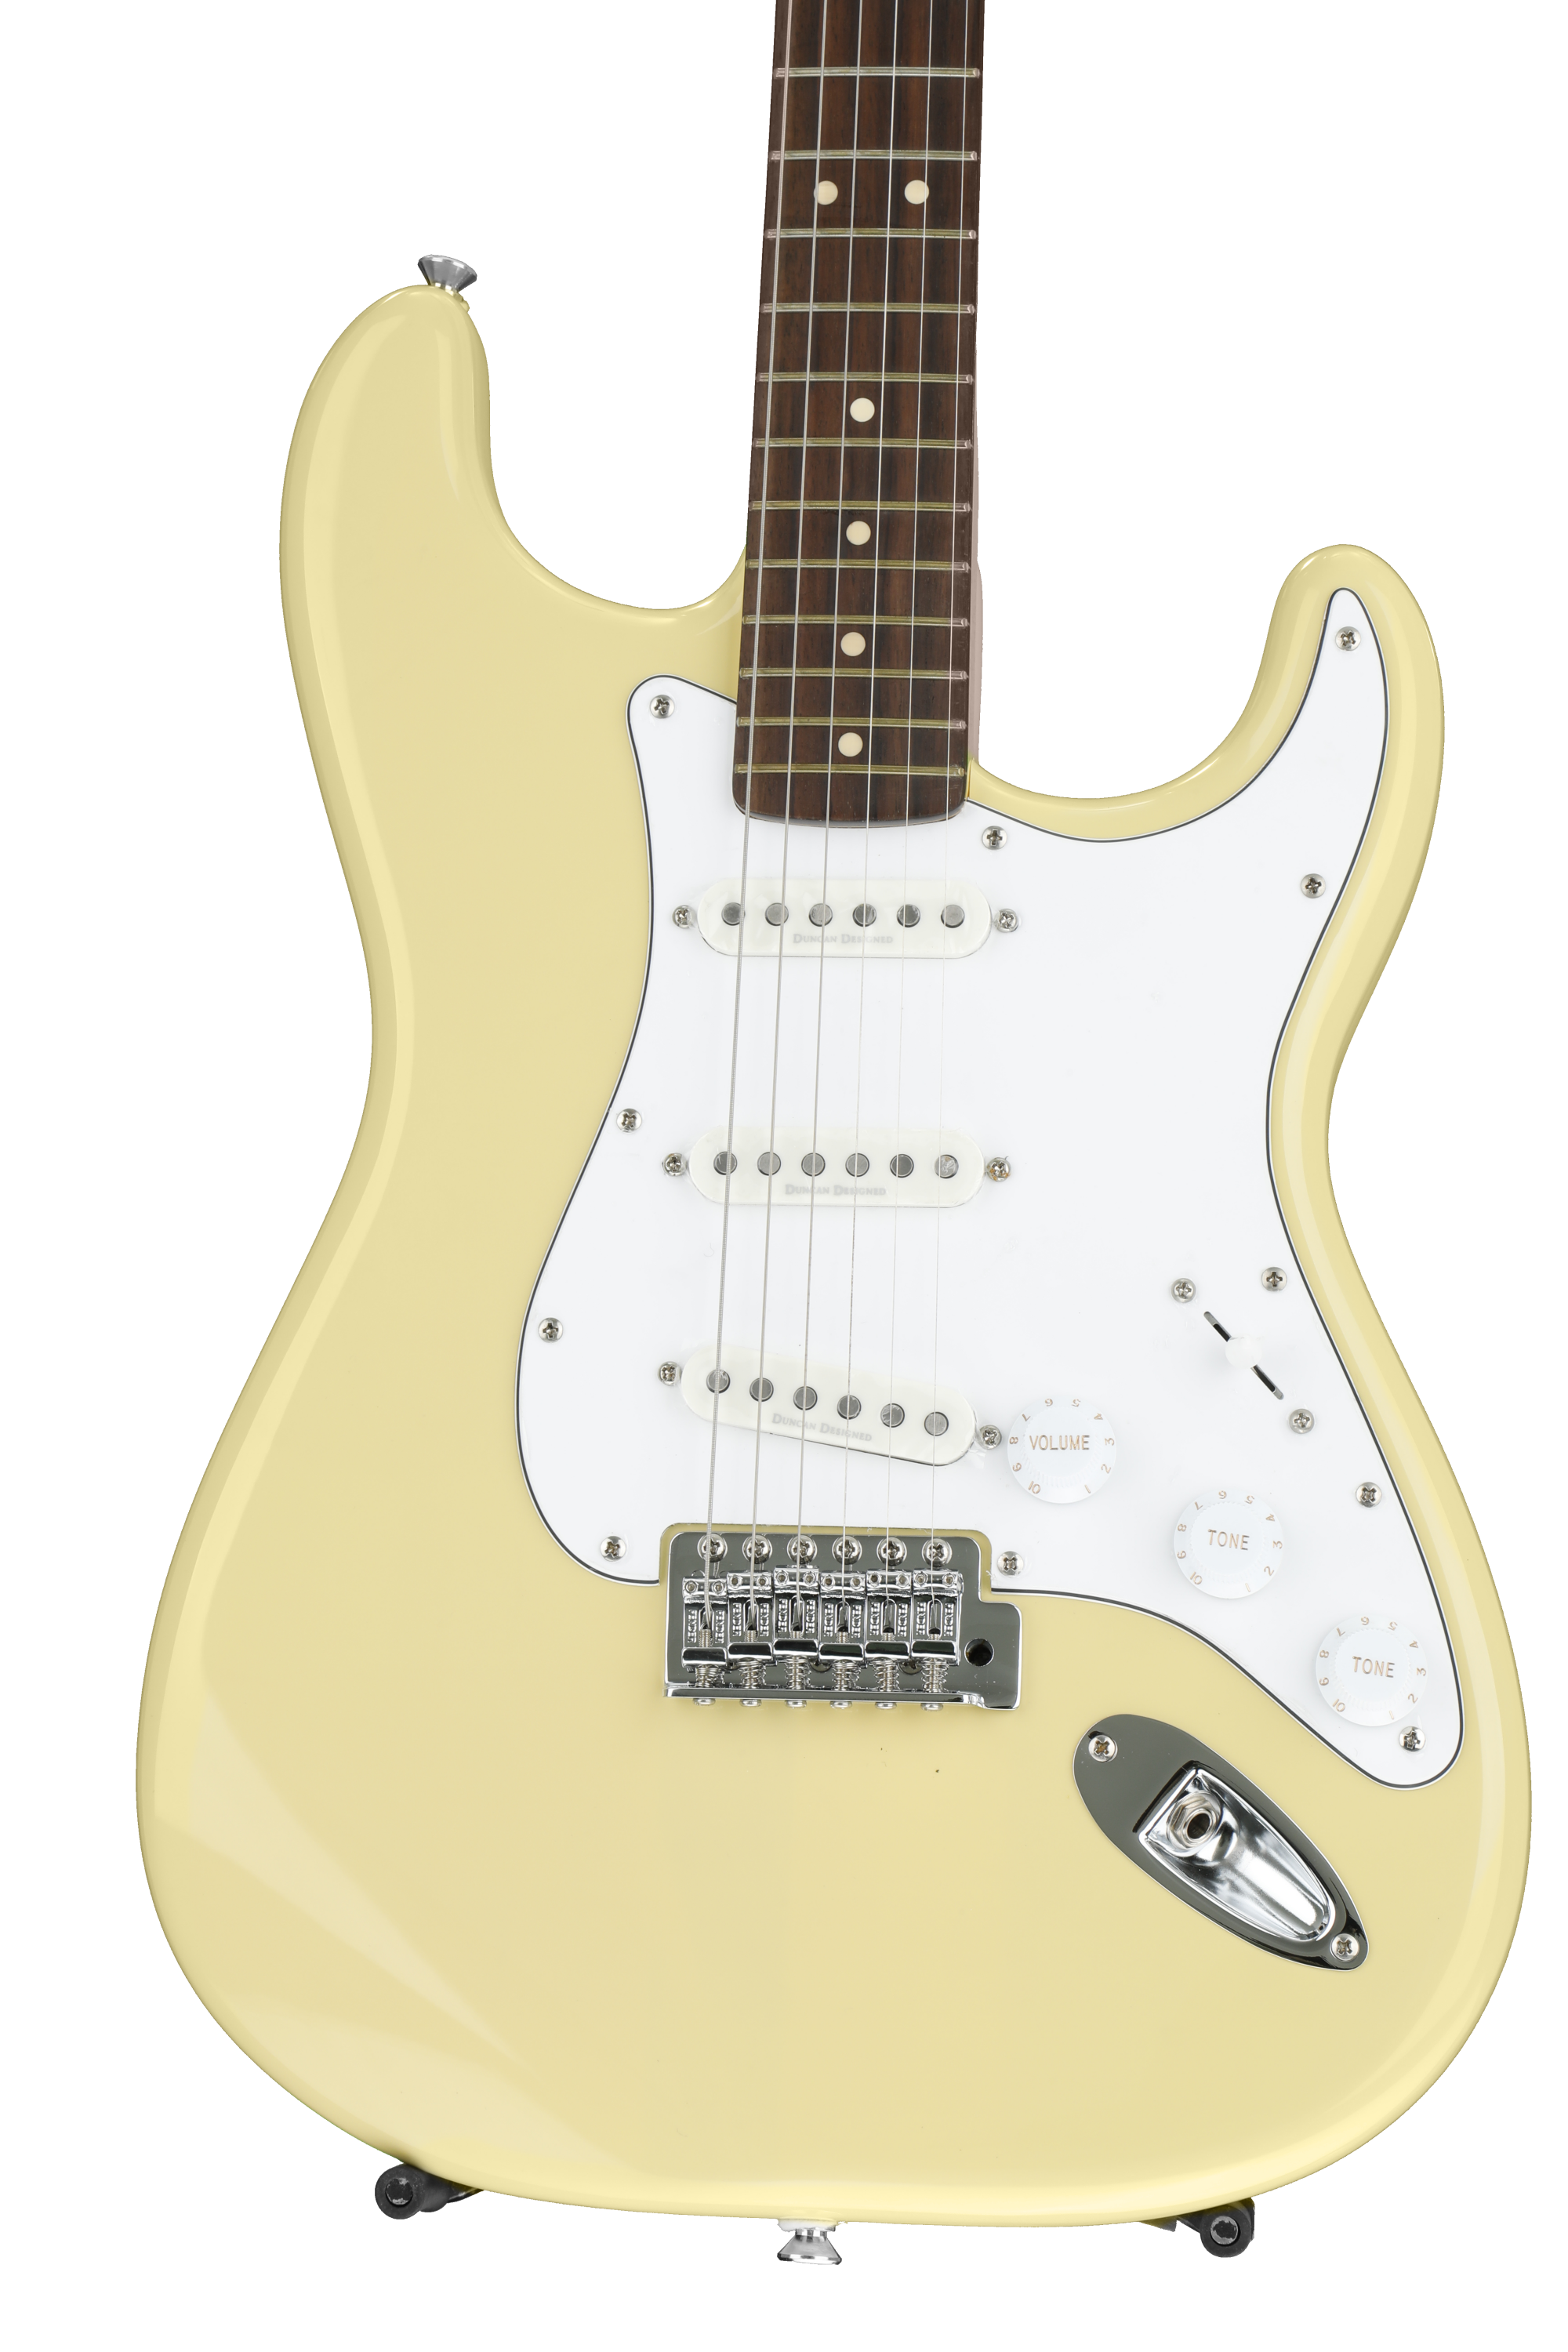 Squier Vintage Modified Stratocaster - Vintage Blonde | Sweetwater